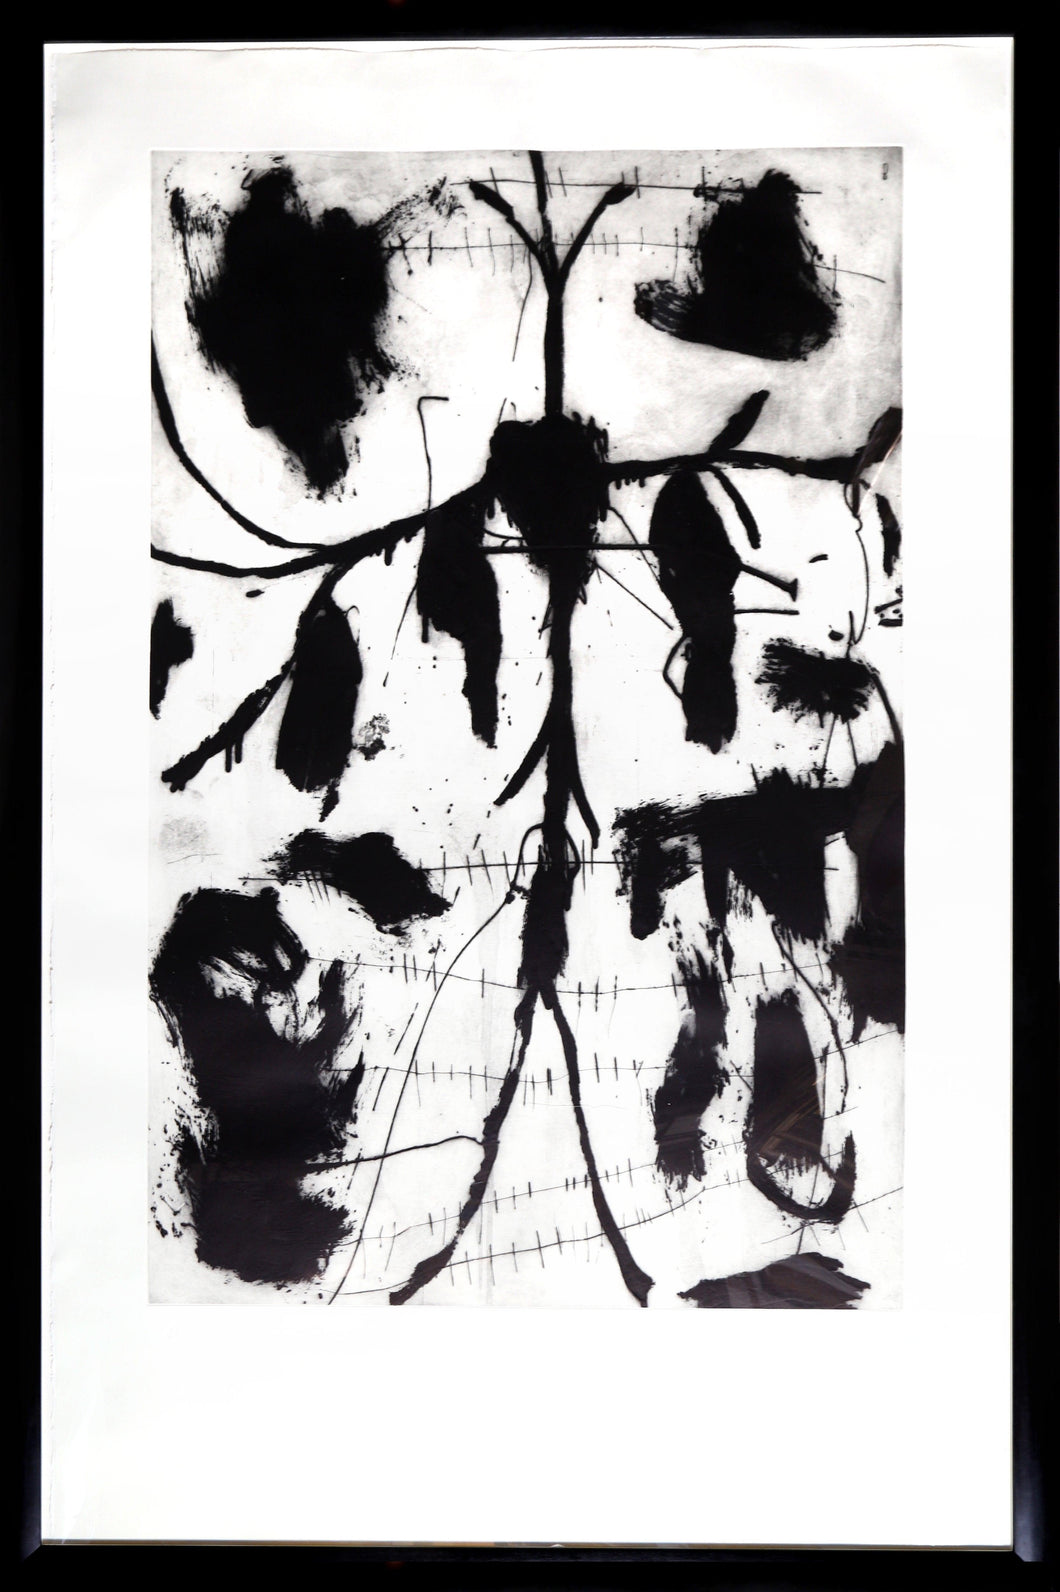 Vespero - Triptych No. 1 Etching | Mimmo Paladino,{{product.type}}